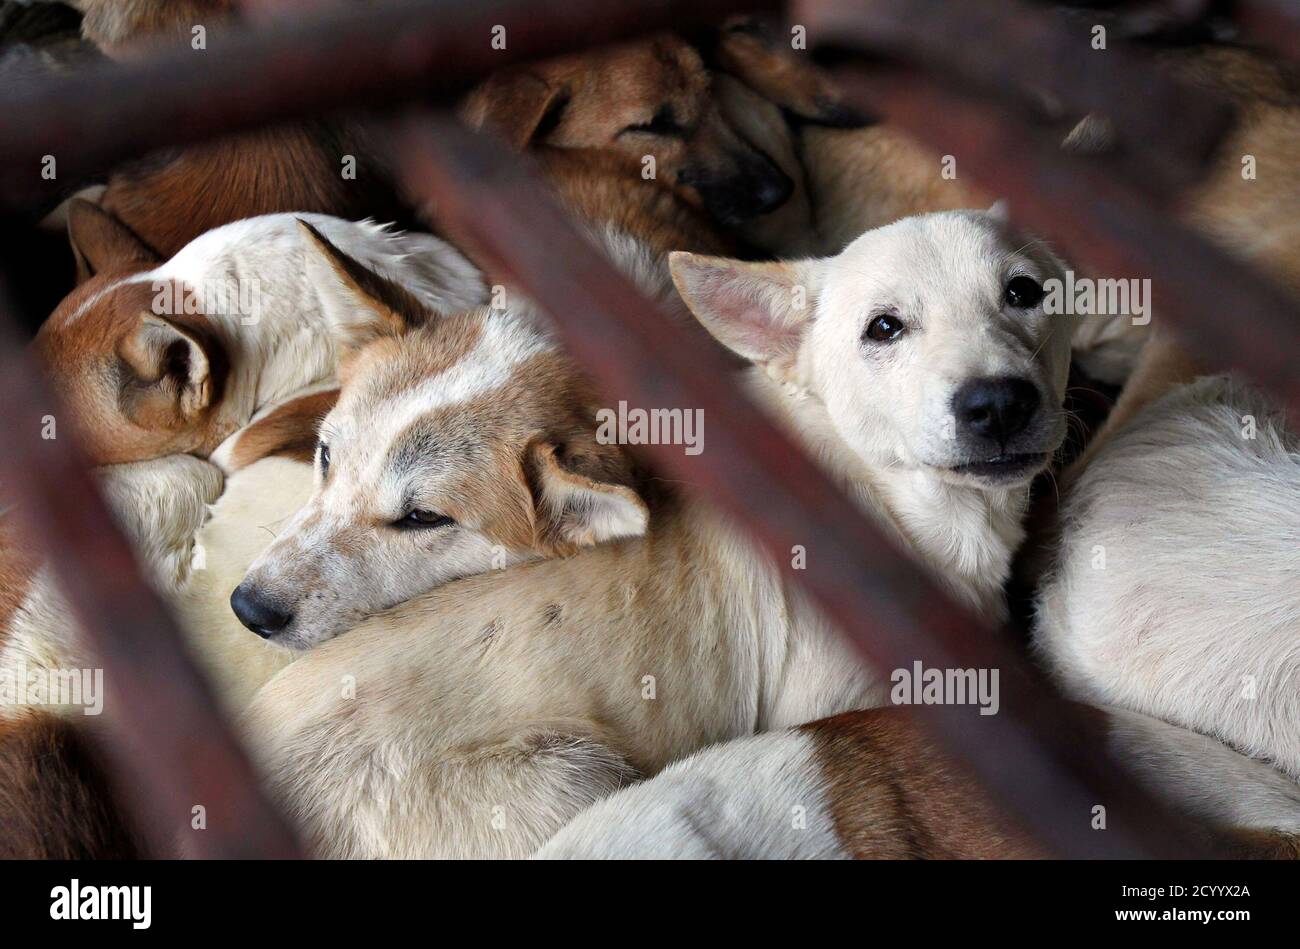 Dogs wait to be slaughtered in a cage for sale as food in Duong Noi  village, outside Hanoi December 16, 2011. While animal rights activists  have condemned eating dog meat as cruel